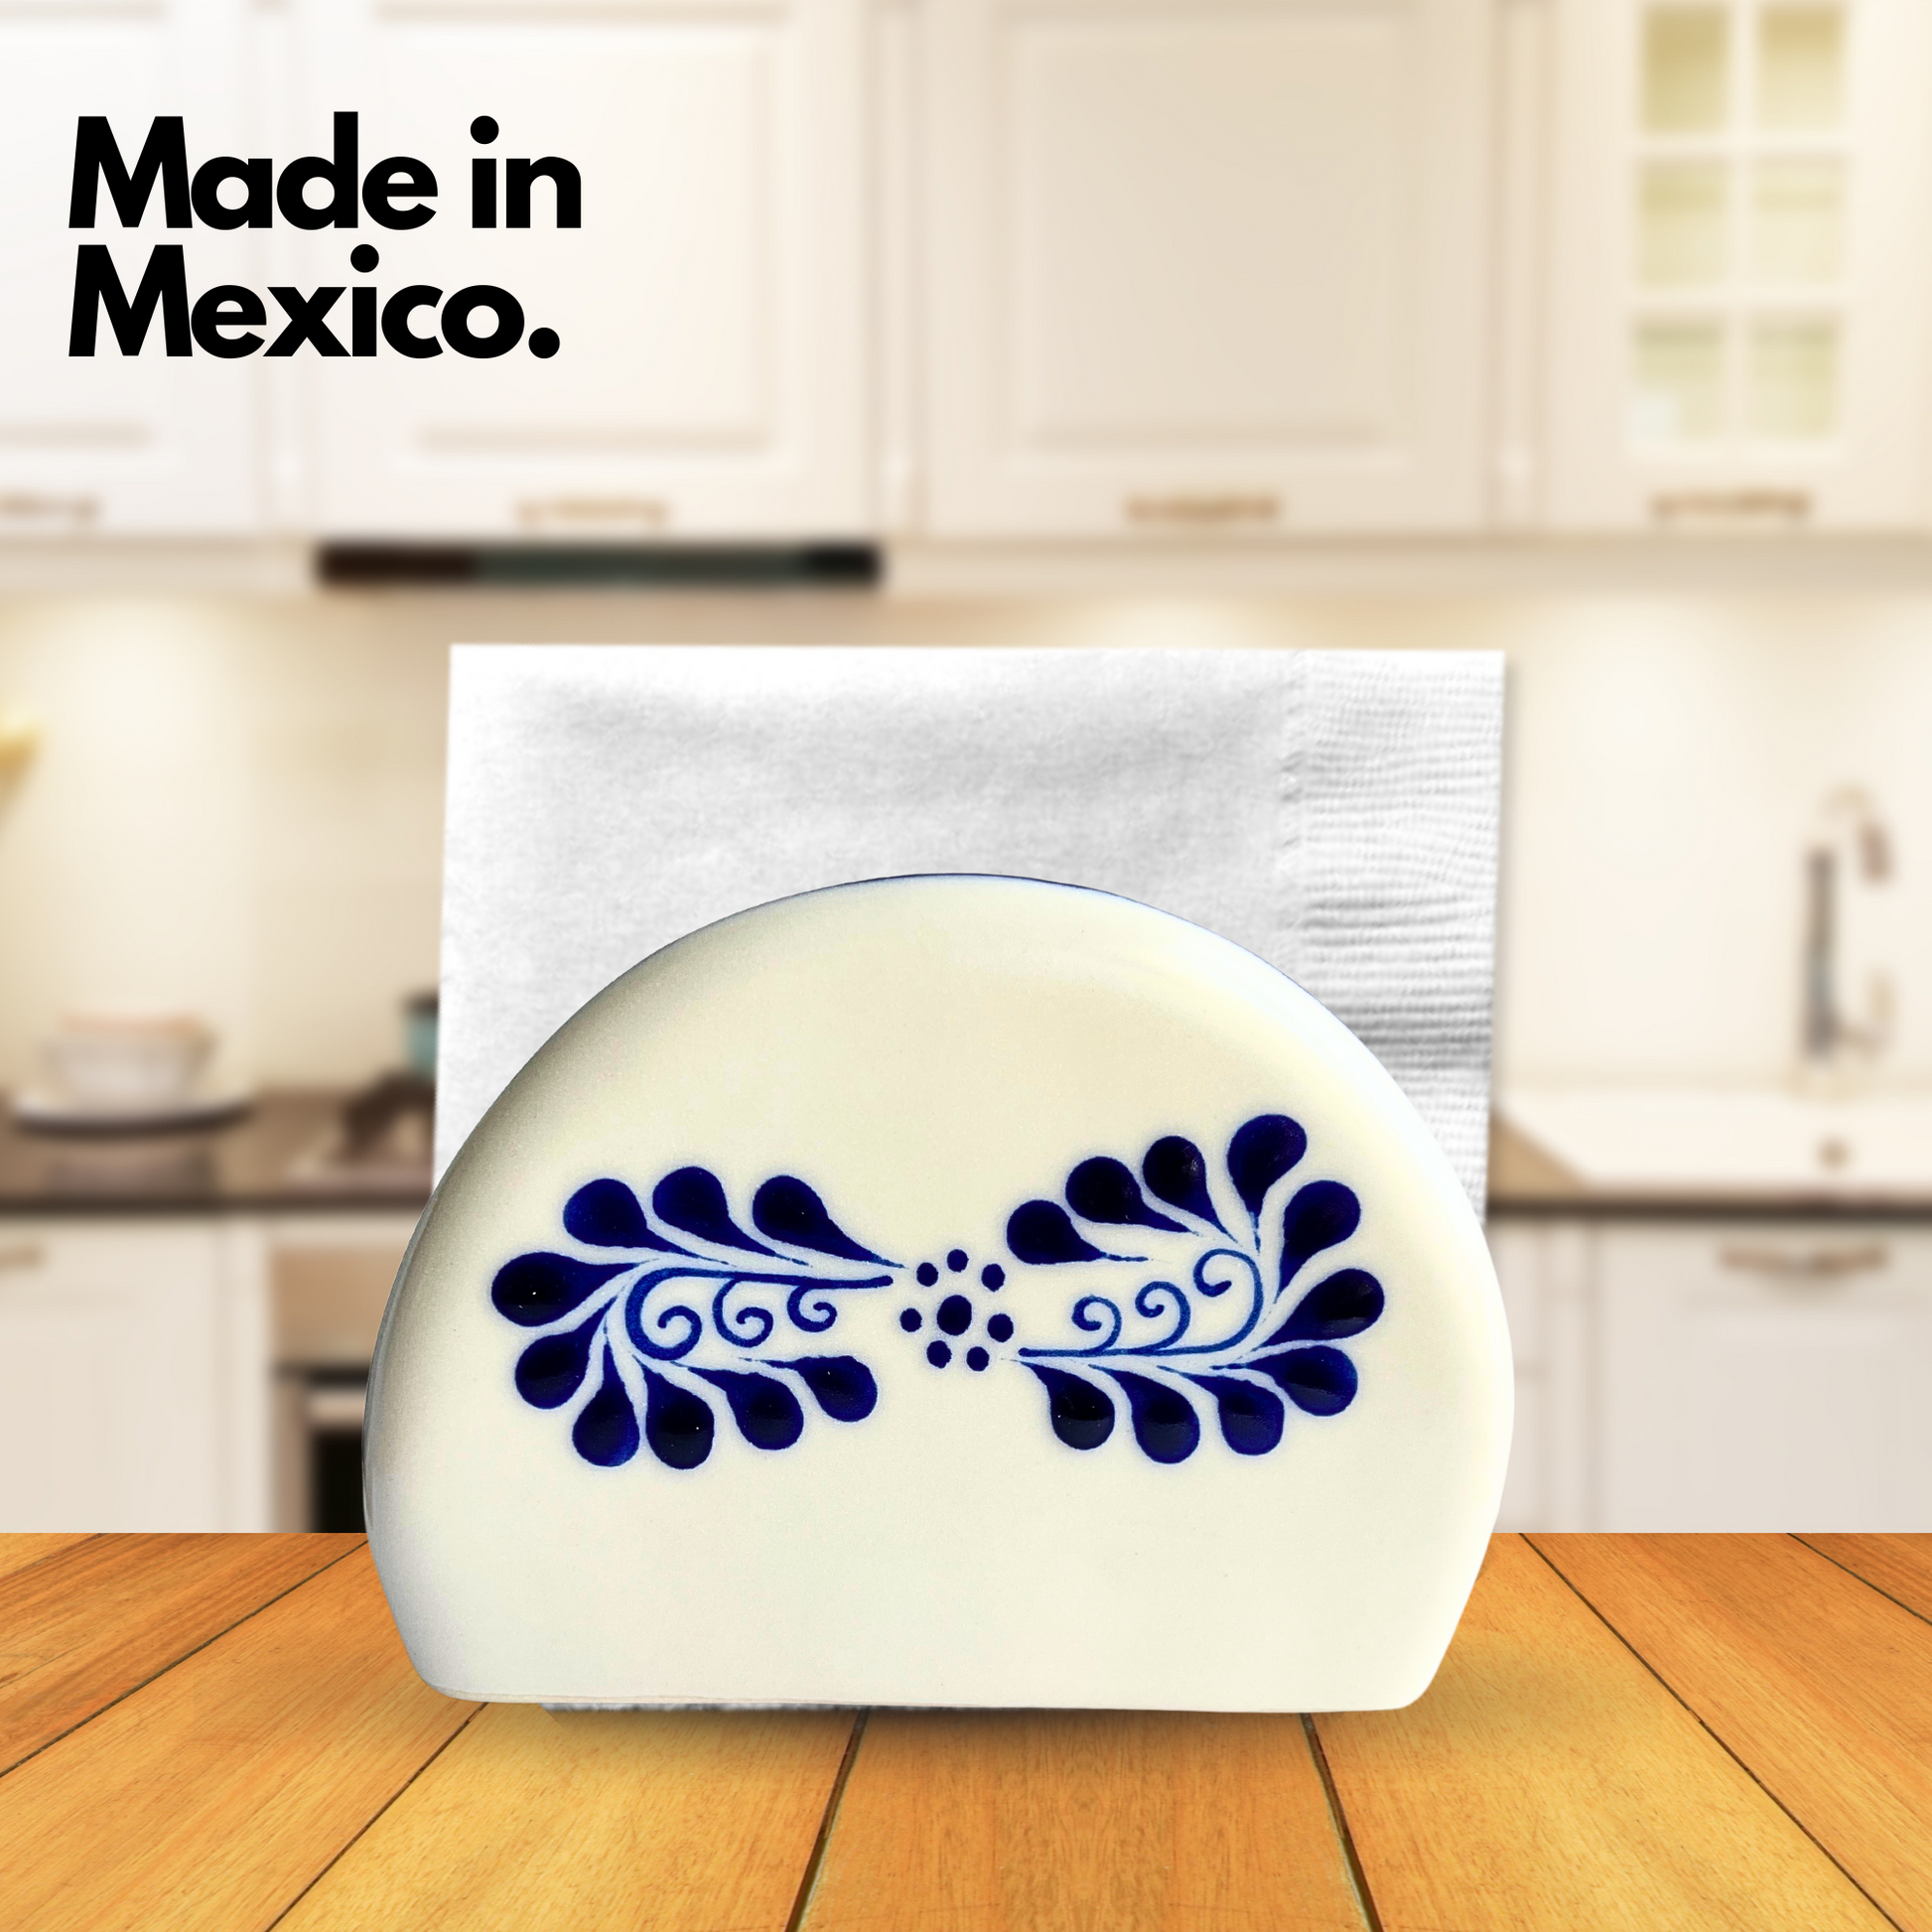 Hand-painted Talavera pottery napkin holder, crafted by top Mexican artisans, adding a lively decorative touch to your kitchen or dining room.